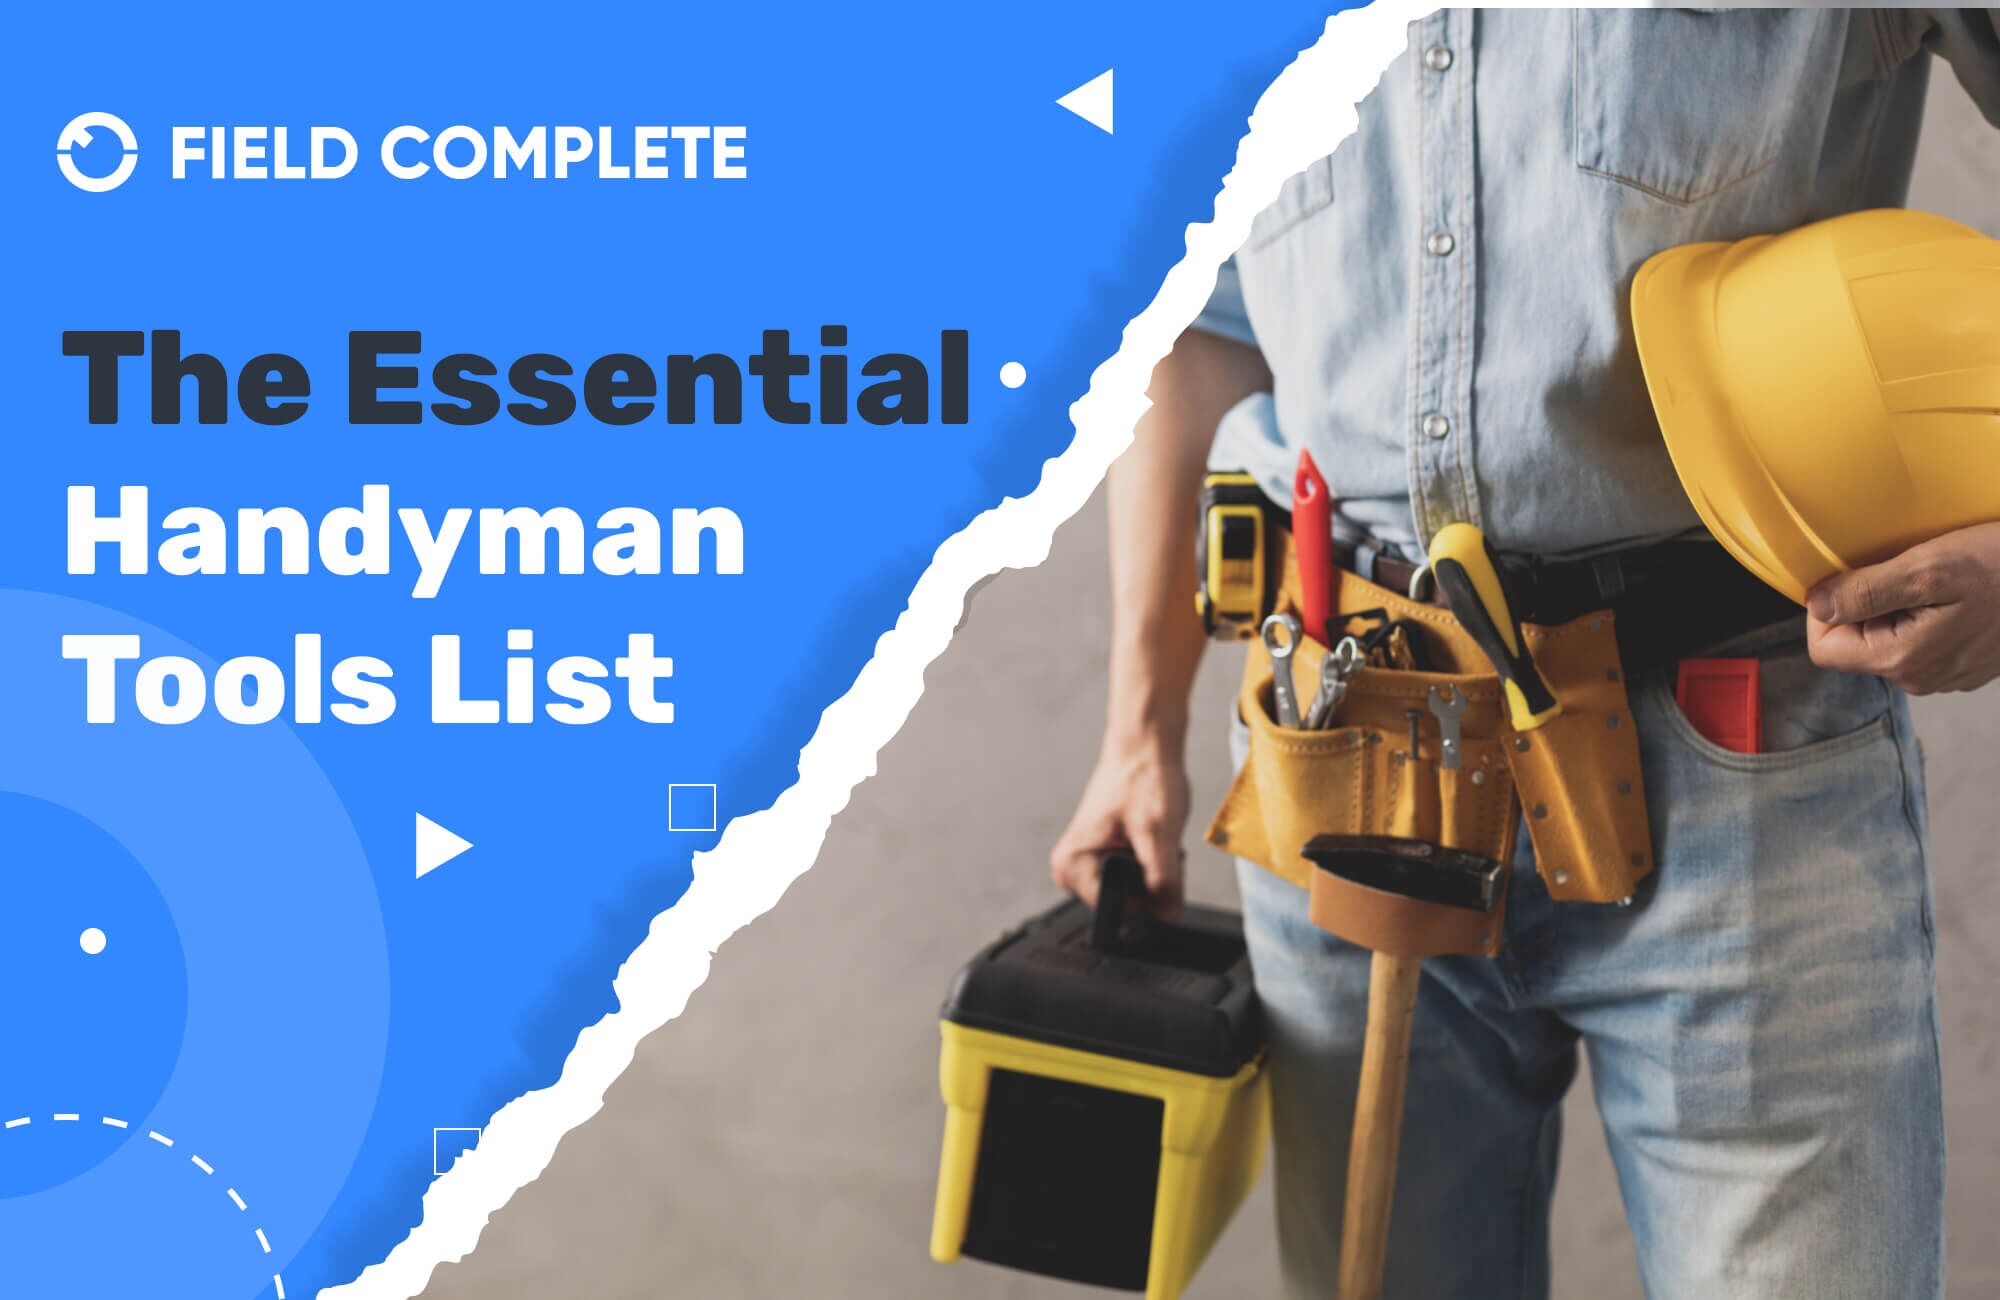 The Essential Handyman Tools List: Building Your Toolkit for Every Job